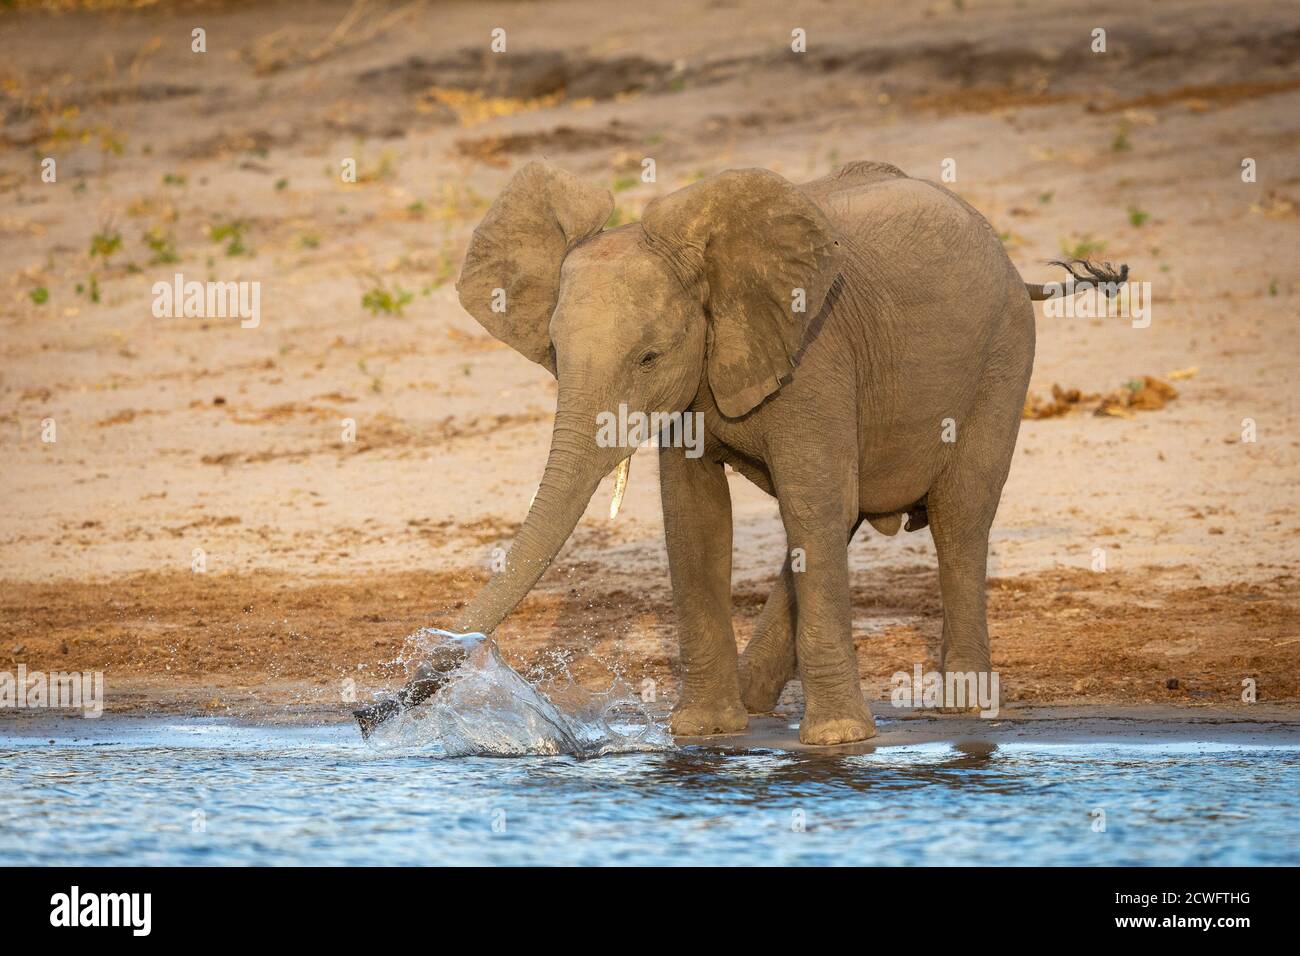 Small elephant standing at the edge of river playing with water splashing in Chobe in Botswana Stock Photo